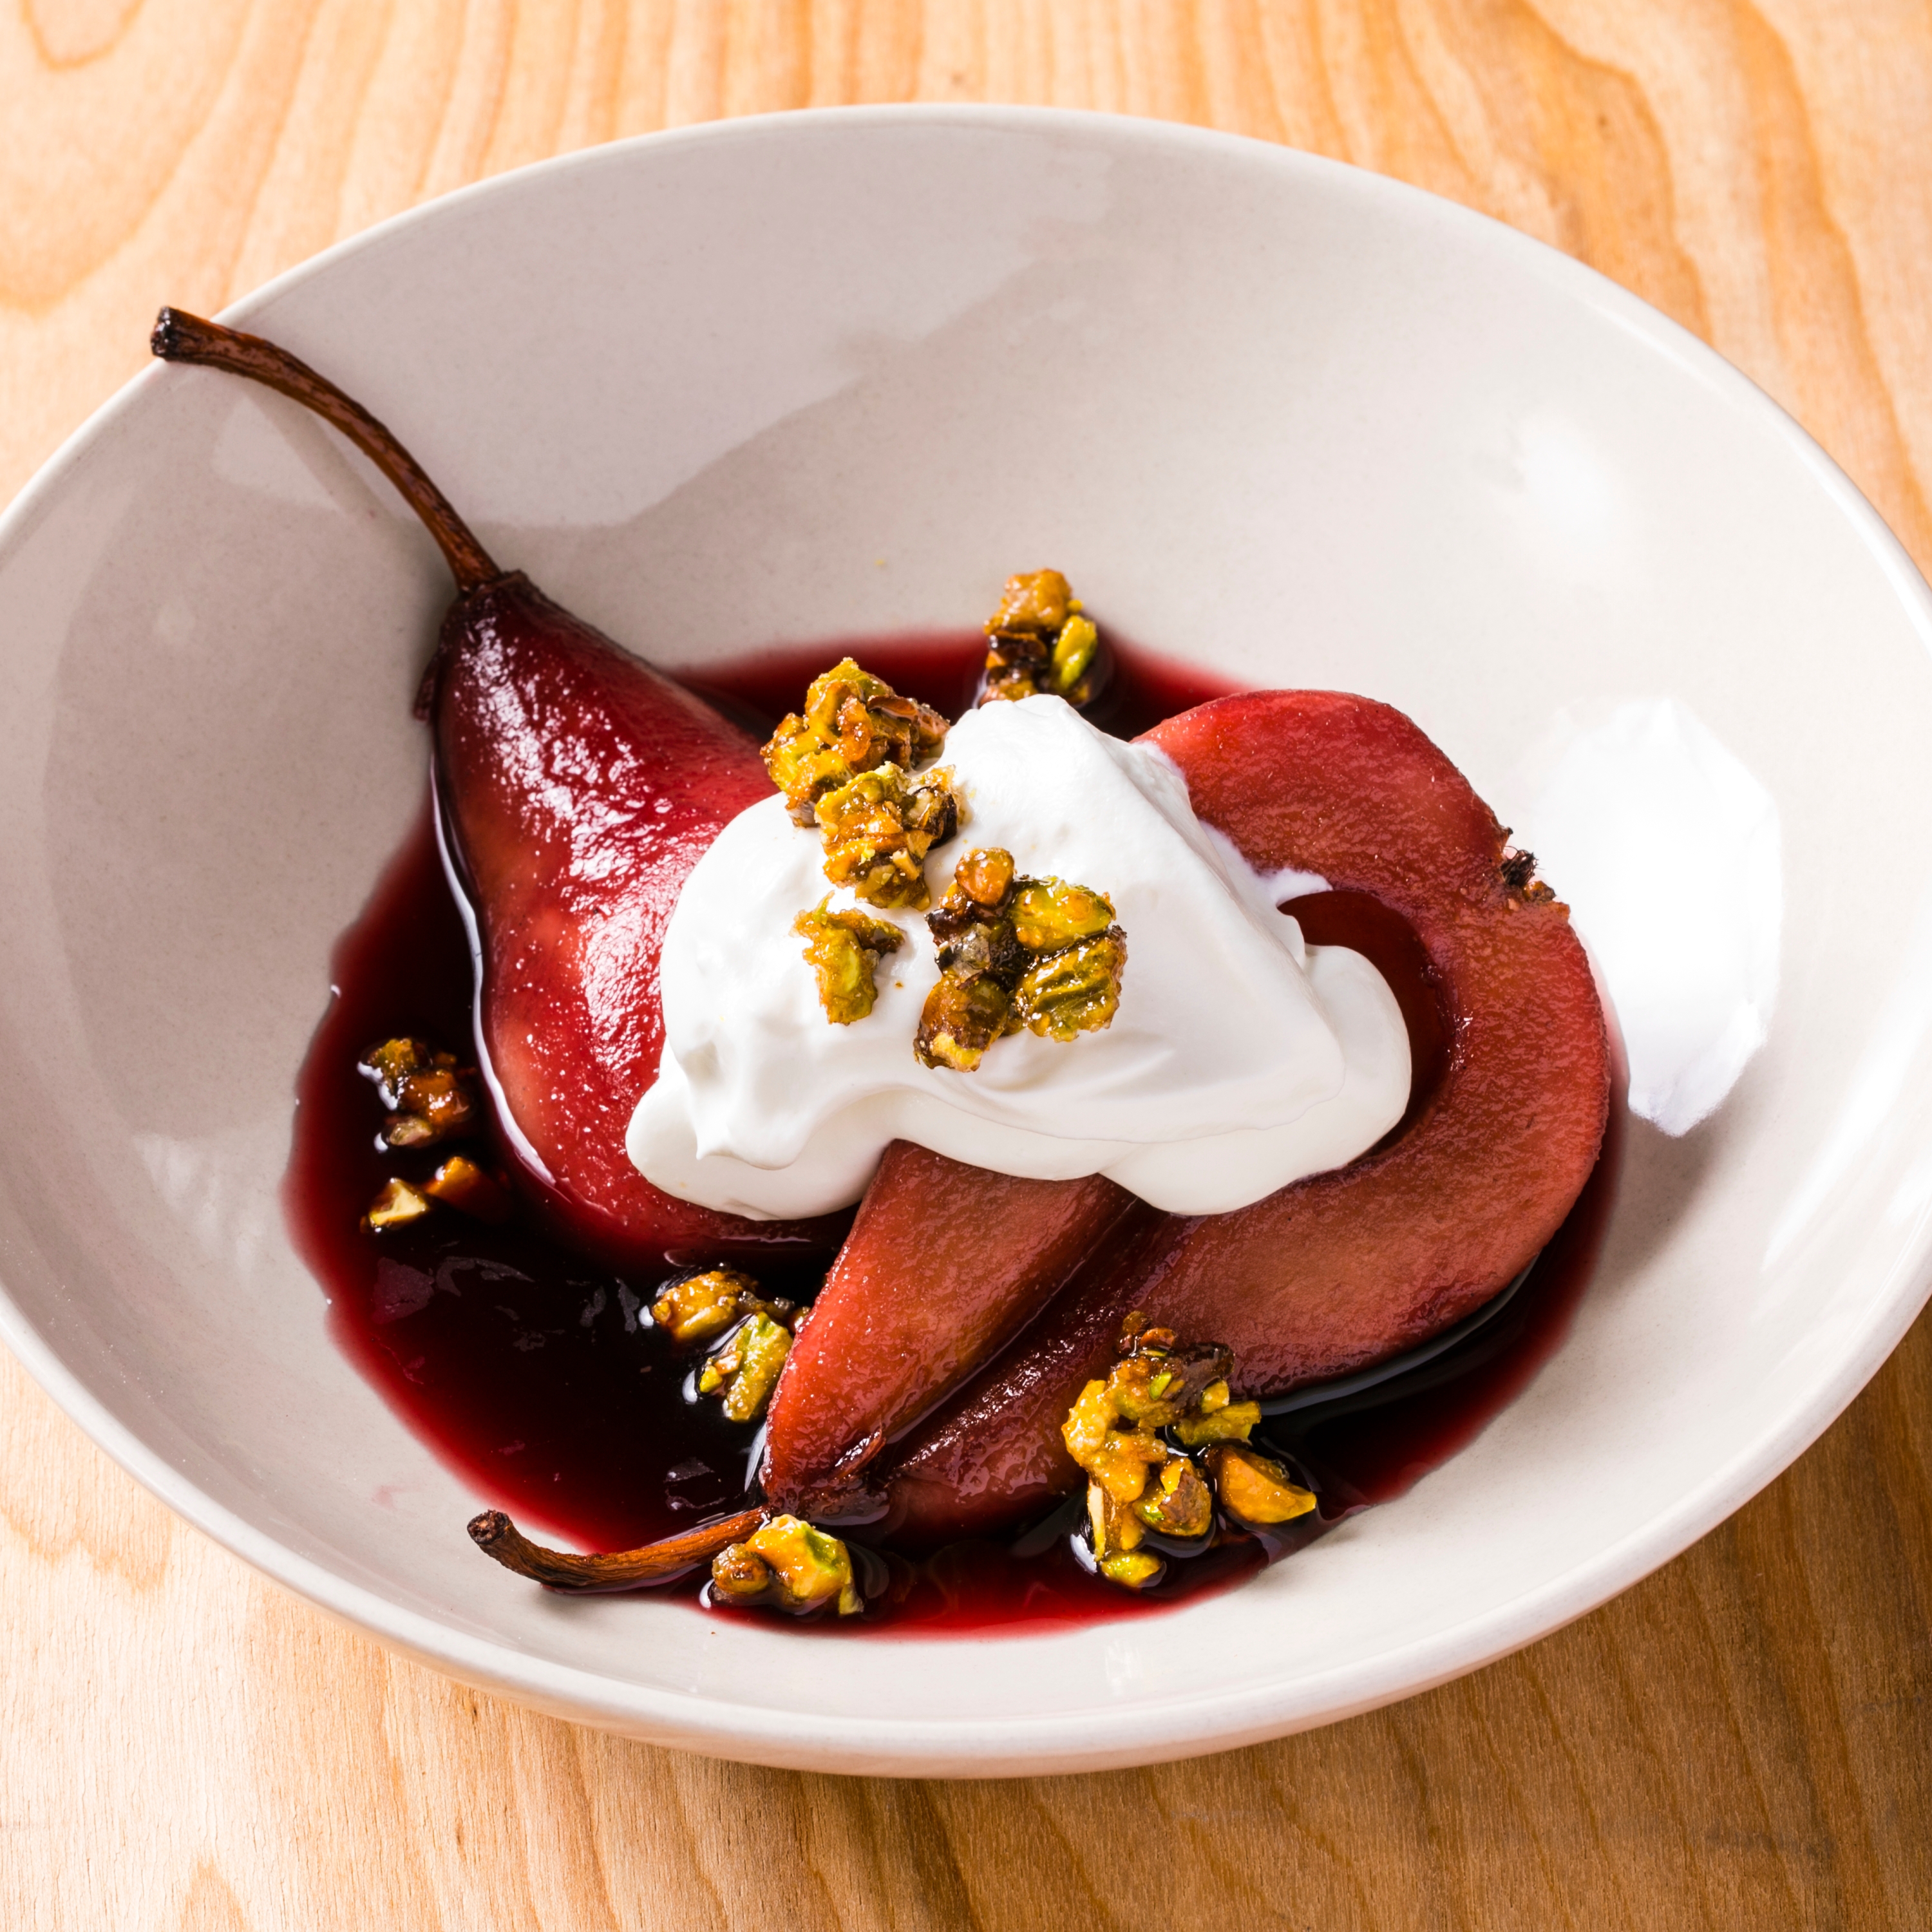 Sous Vide Red Wine-Poached Pears with Whipped Sour Cream and Candied Pistachios | America's Test Recipe